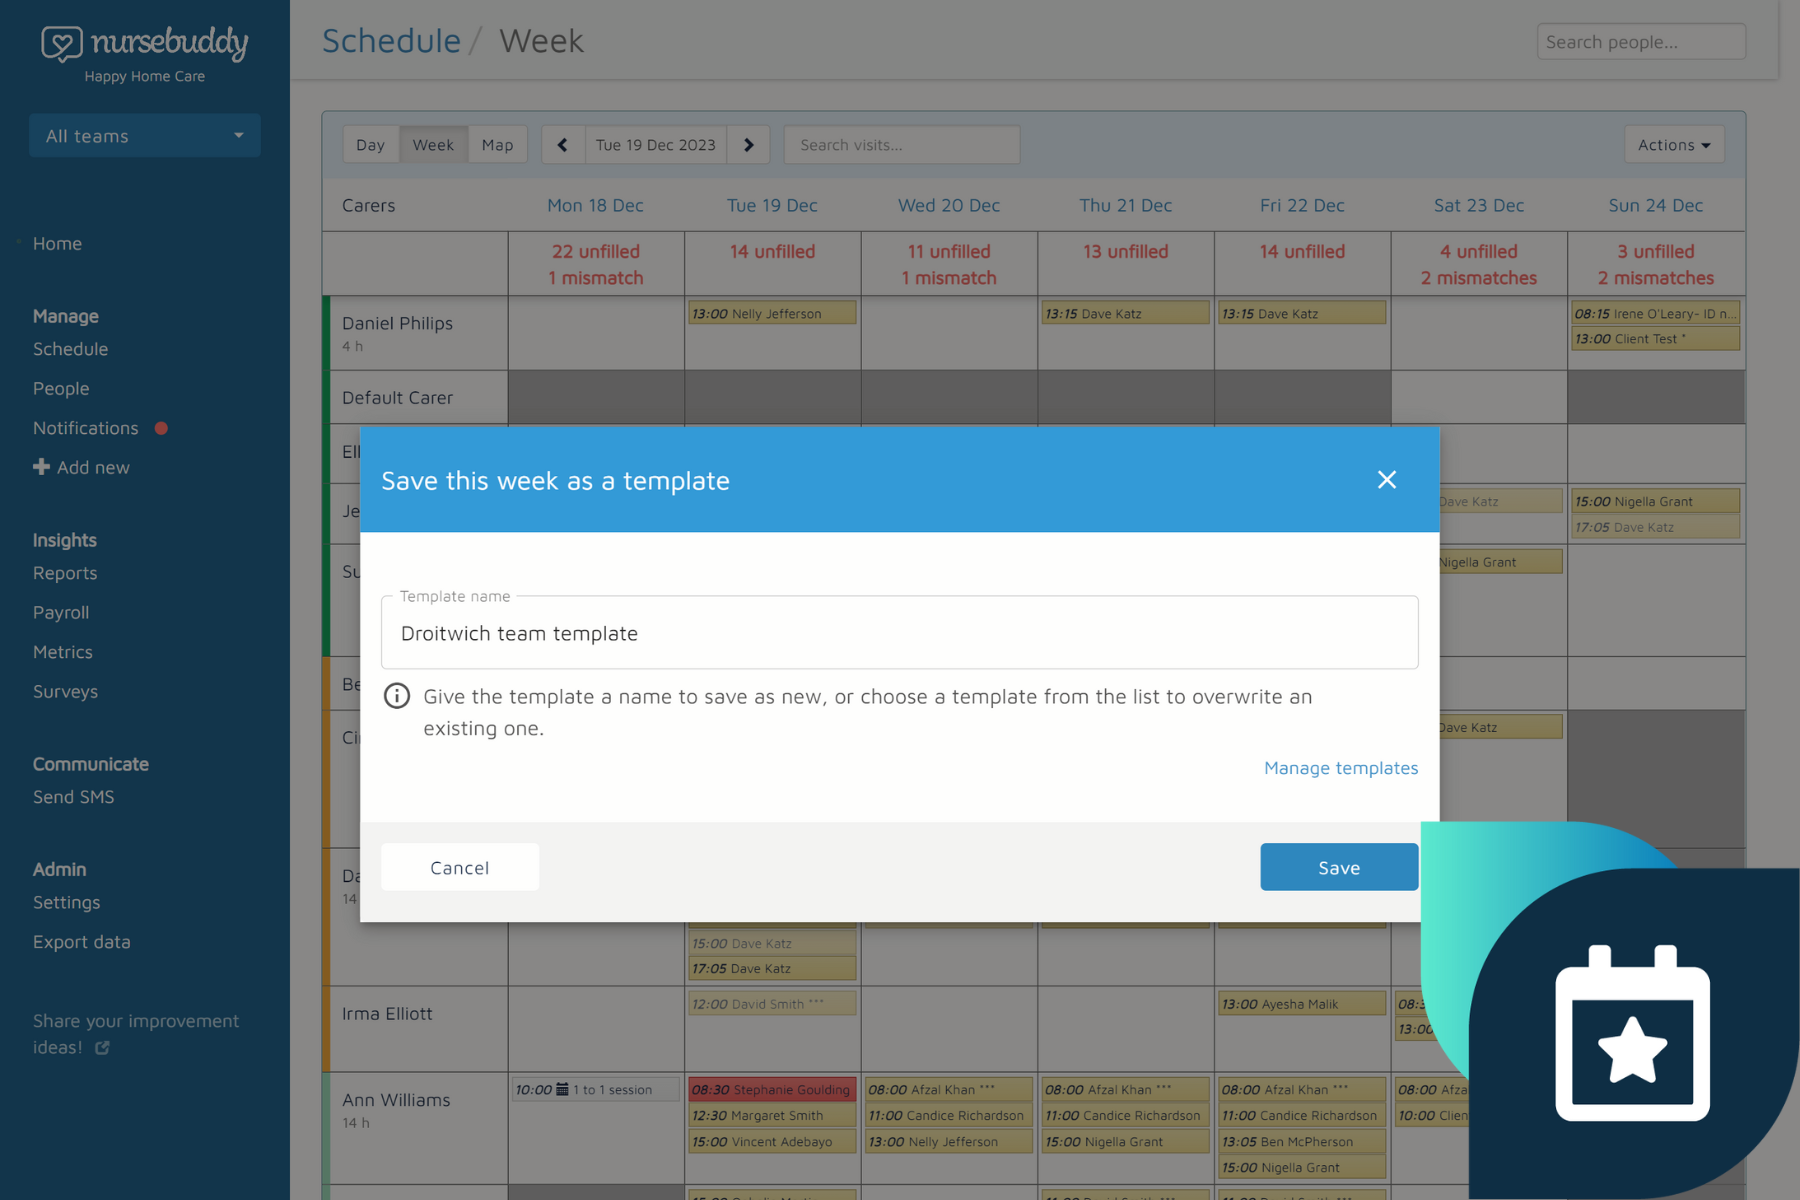 An example of creating a scheduling template in Nursebuddy